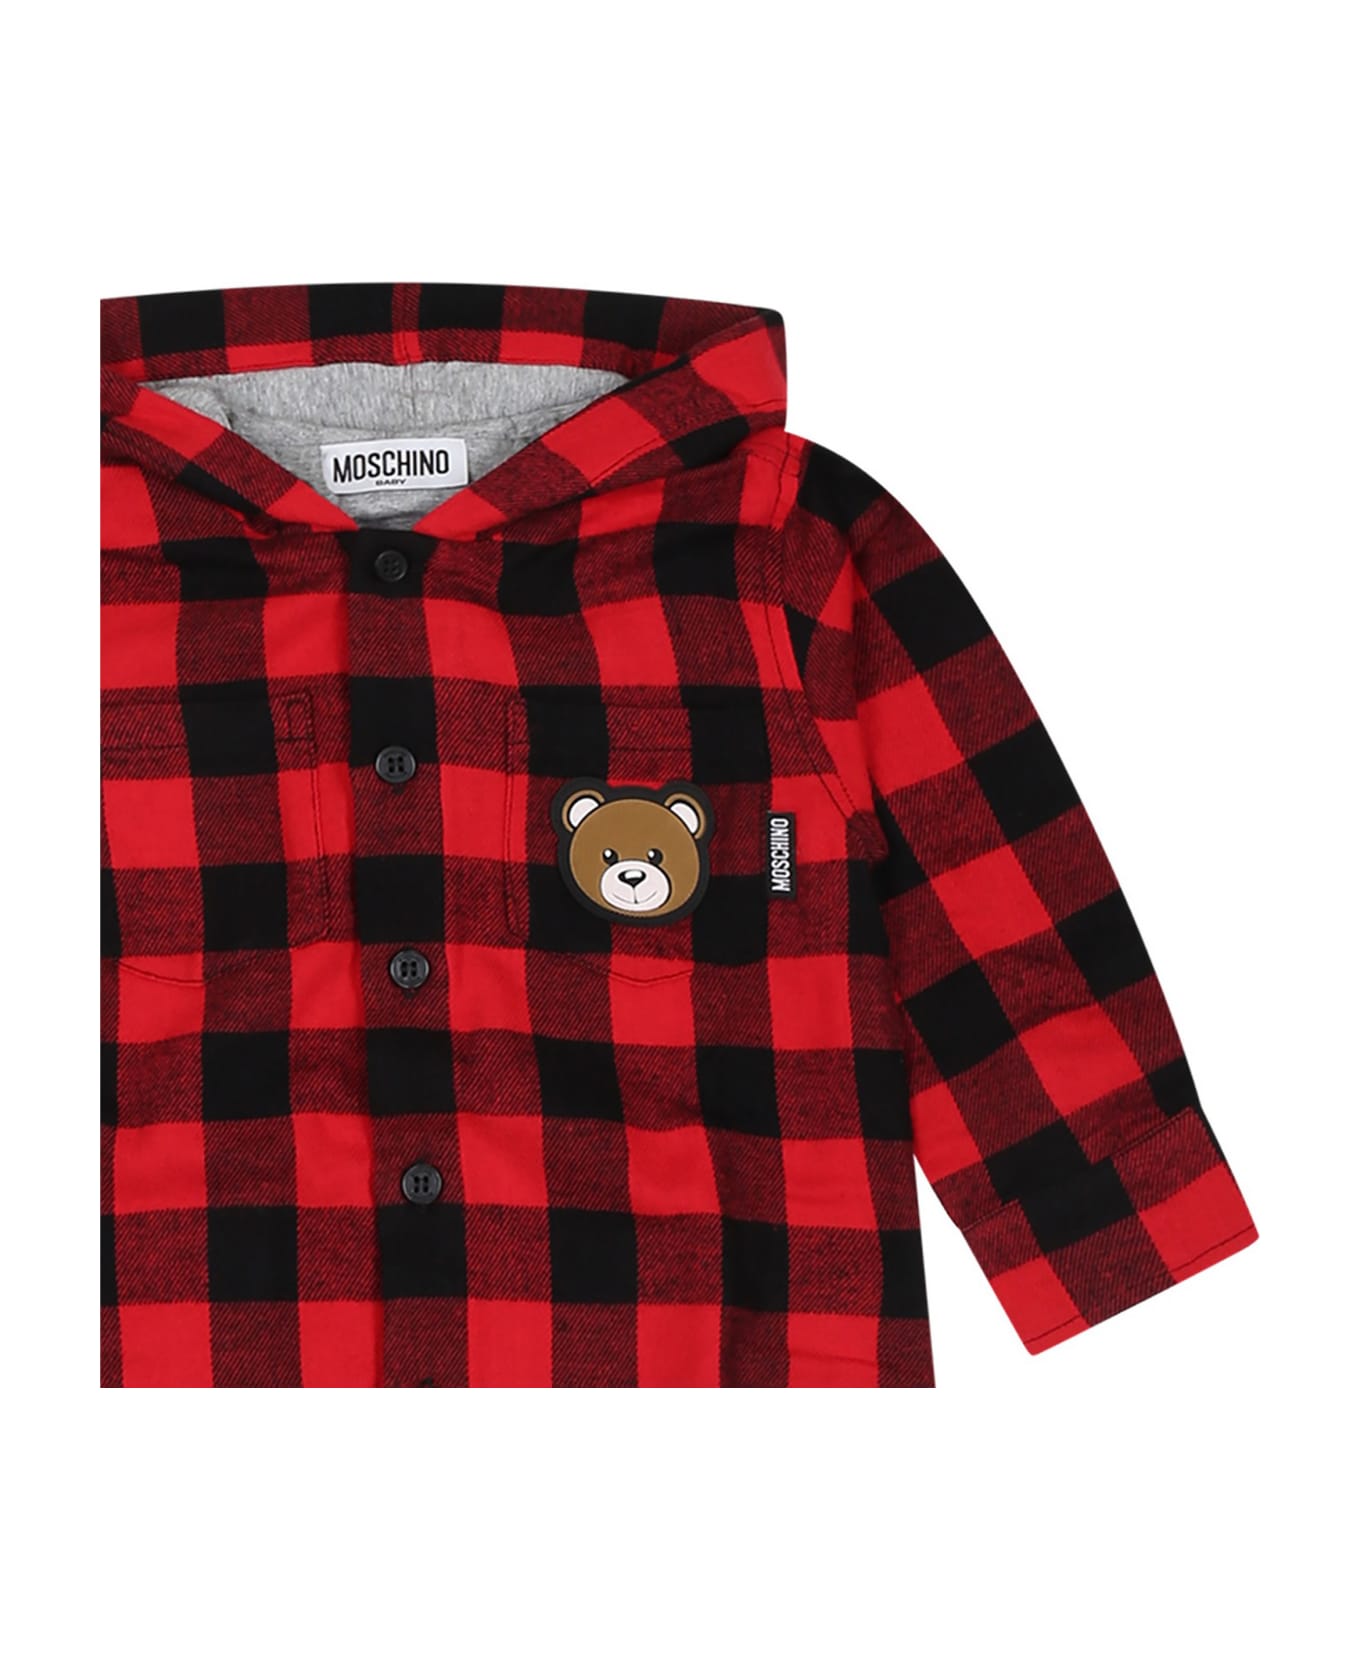 Moschino Red Shirt For Baby Boy With Teddy Bear And Logo - Red